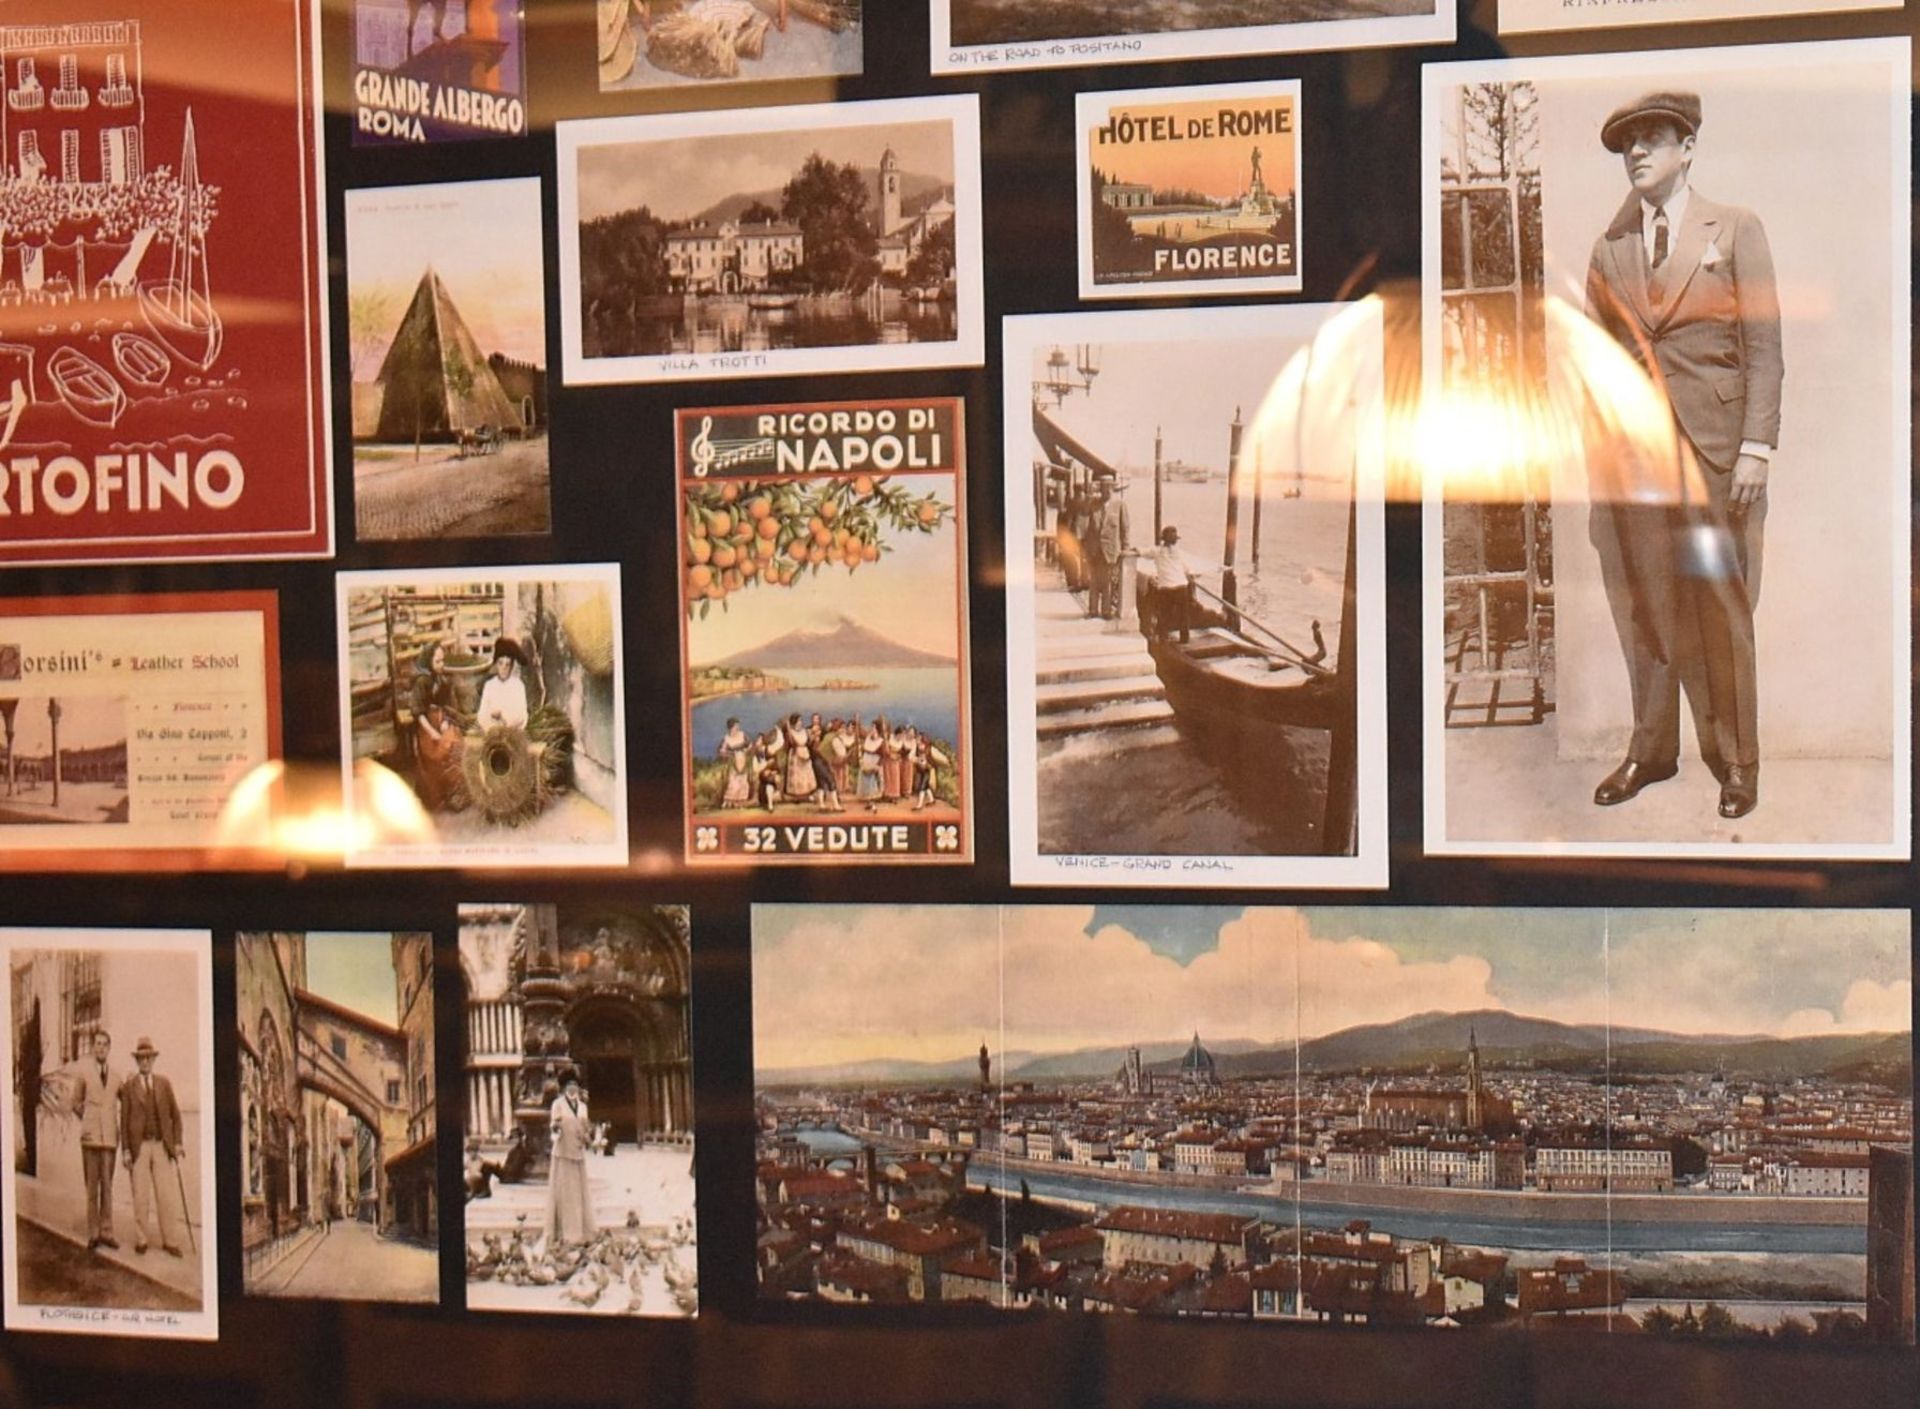 1 x Framed Montage Featuring Nostalgic Italian Travel-Related Imagery - Dimensions: 110 x 89cm - - Image 3 of 4